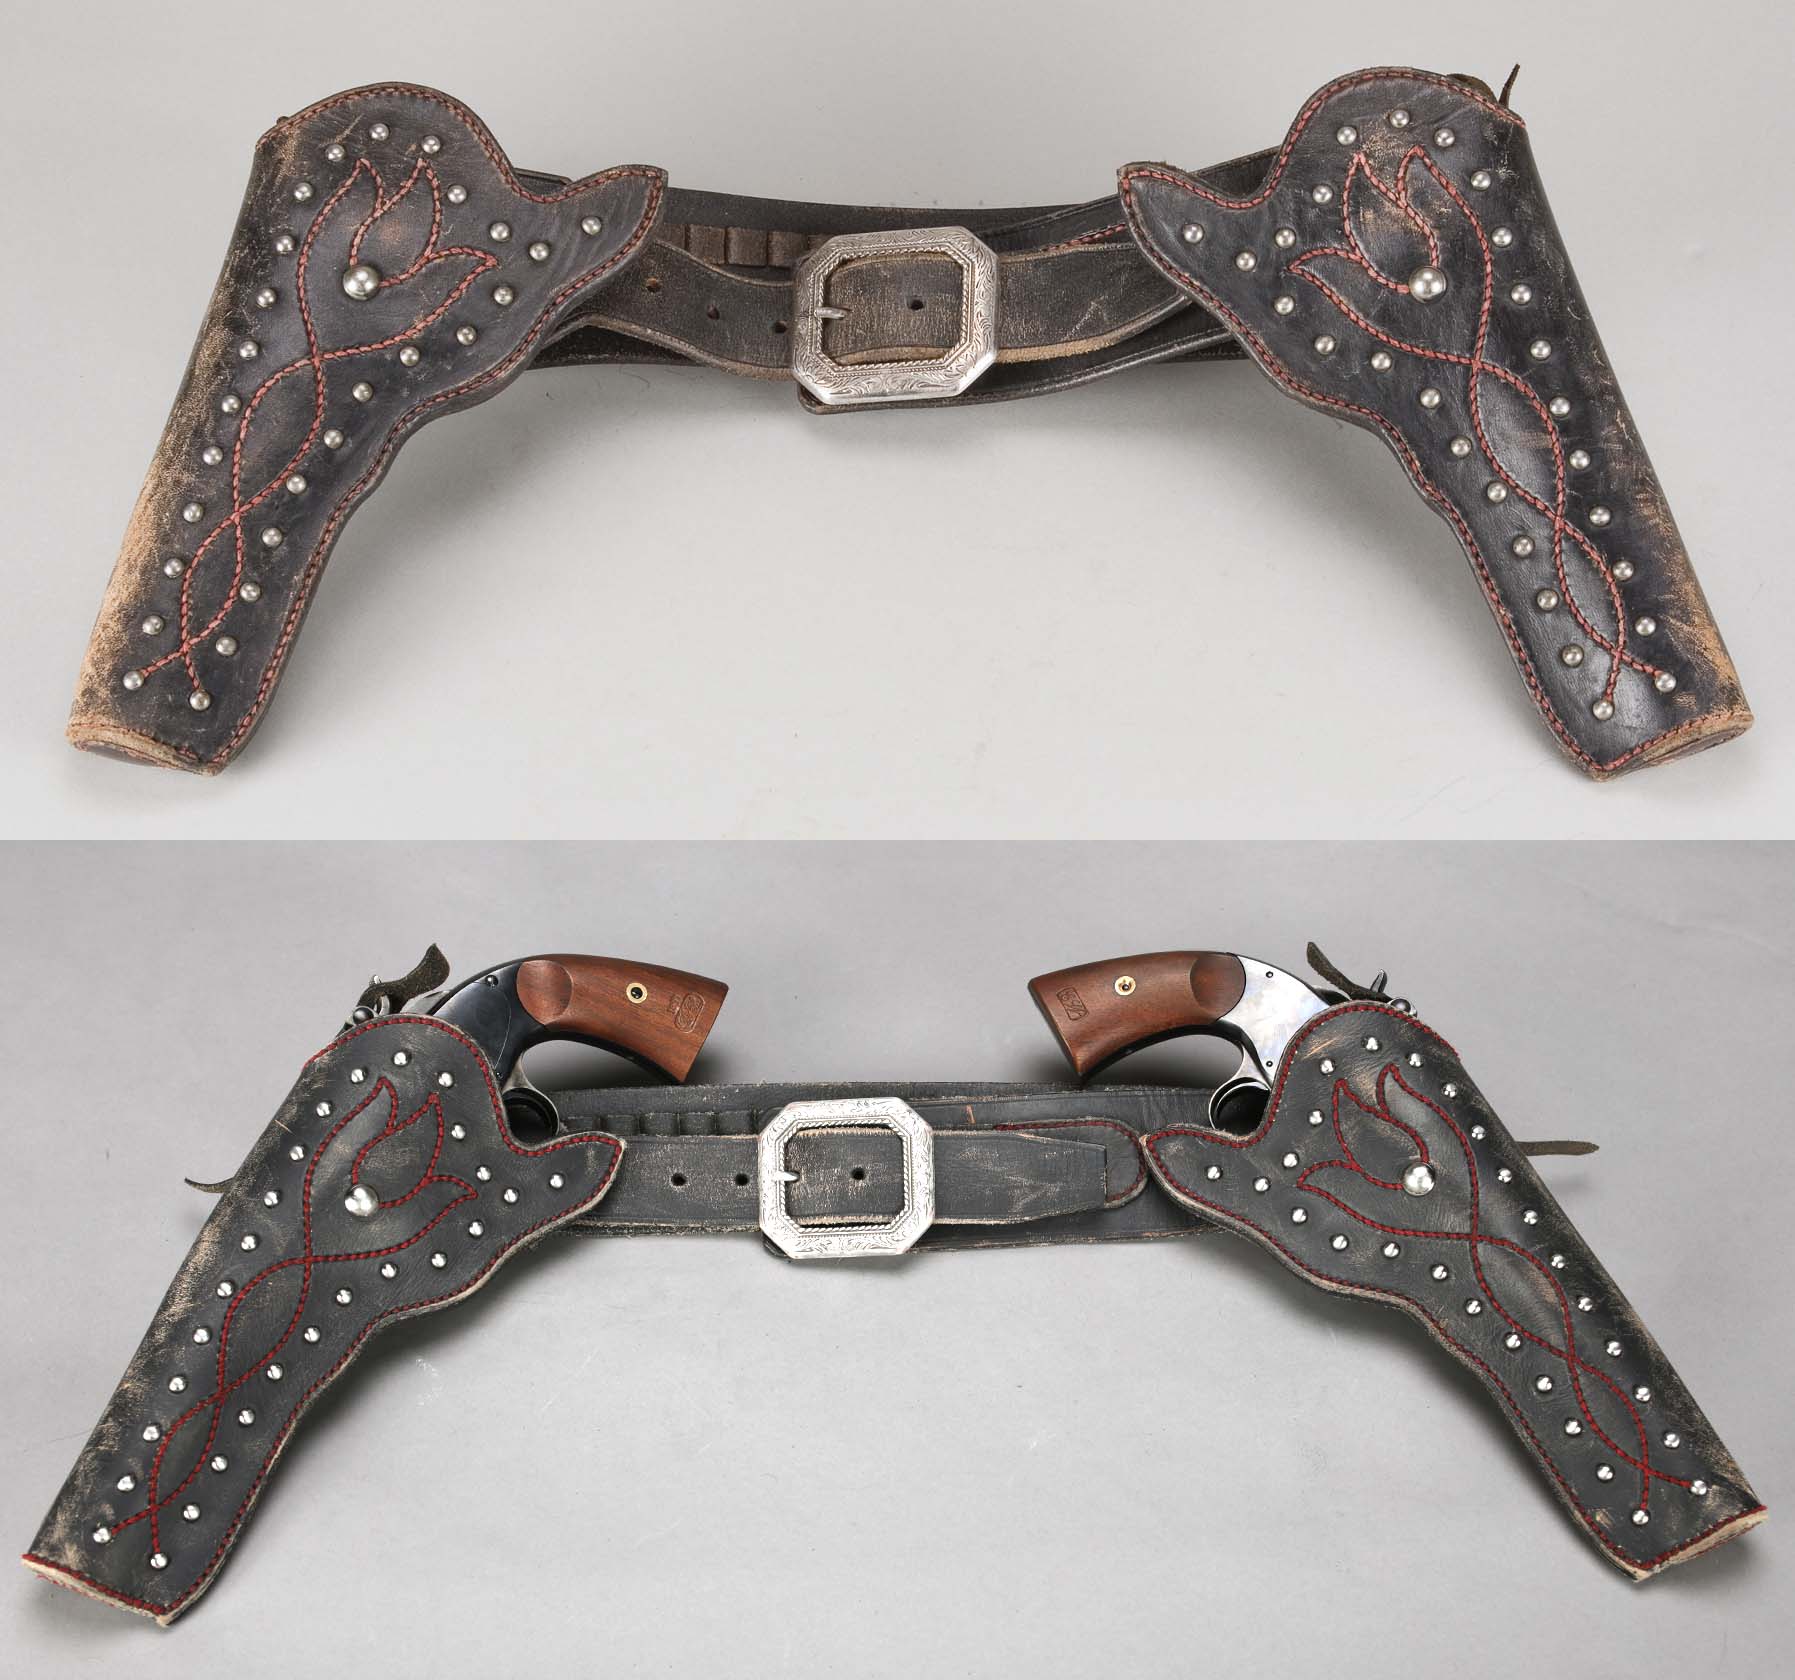 310-to-yuma-charlie-prince-holster-rig-will-ghormley-reproduction-compare.jpg